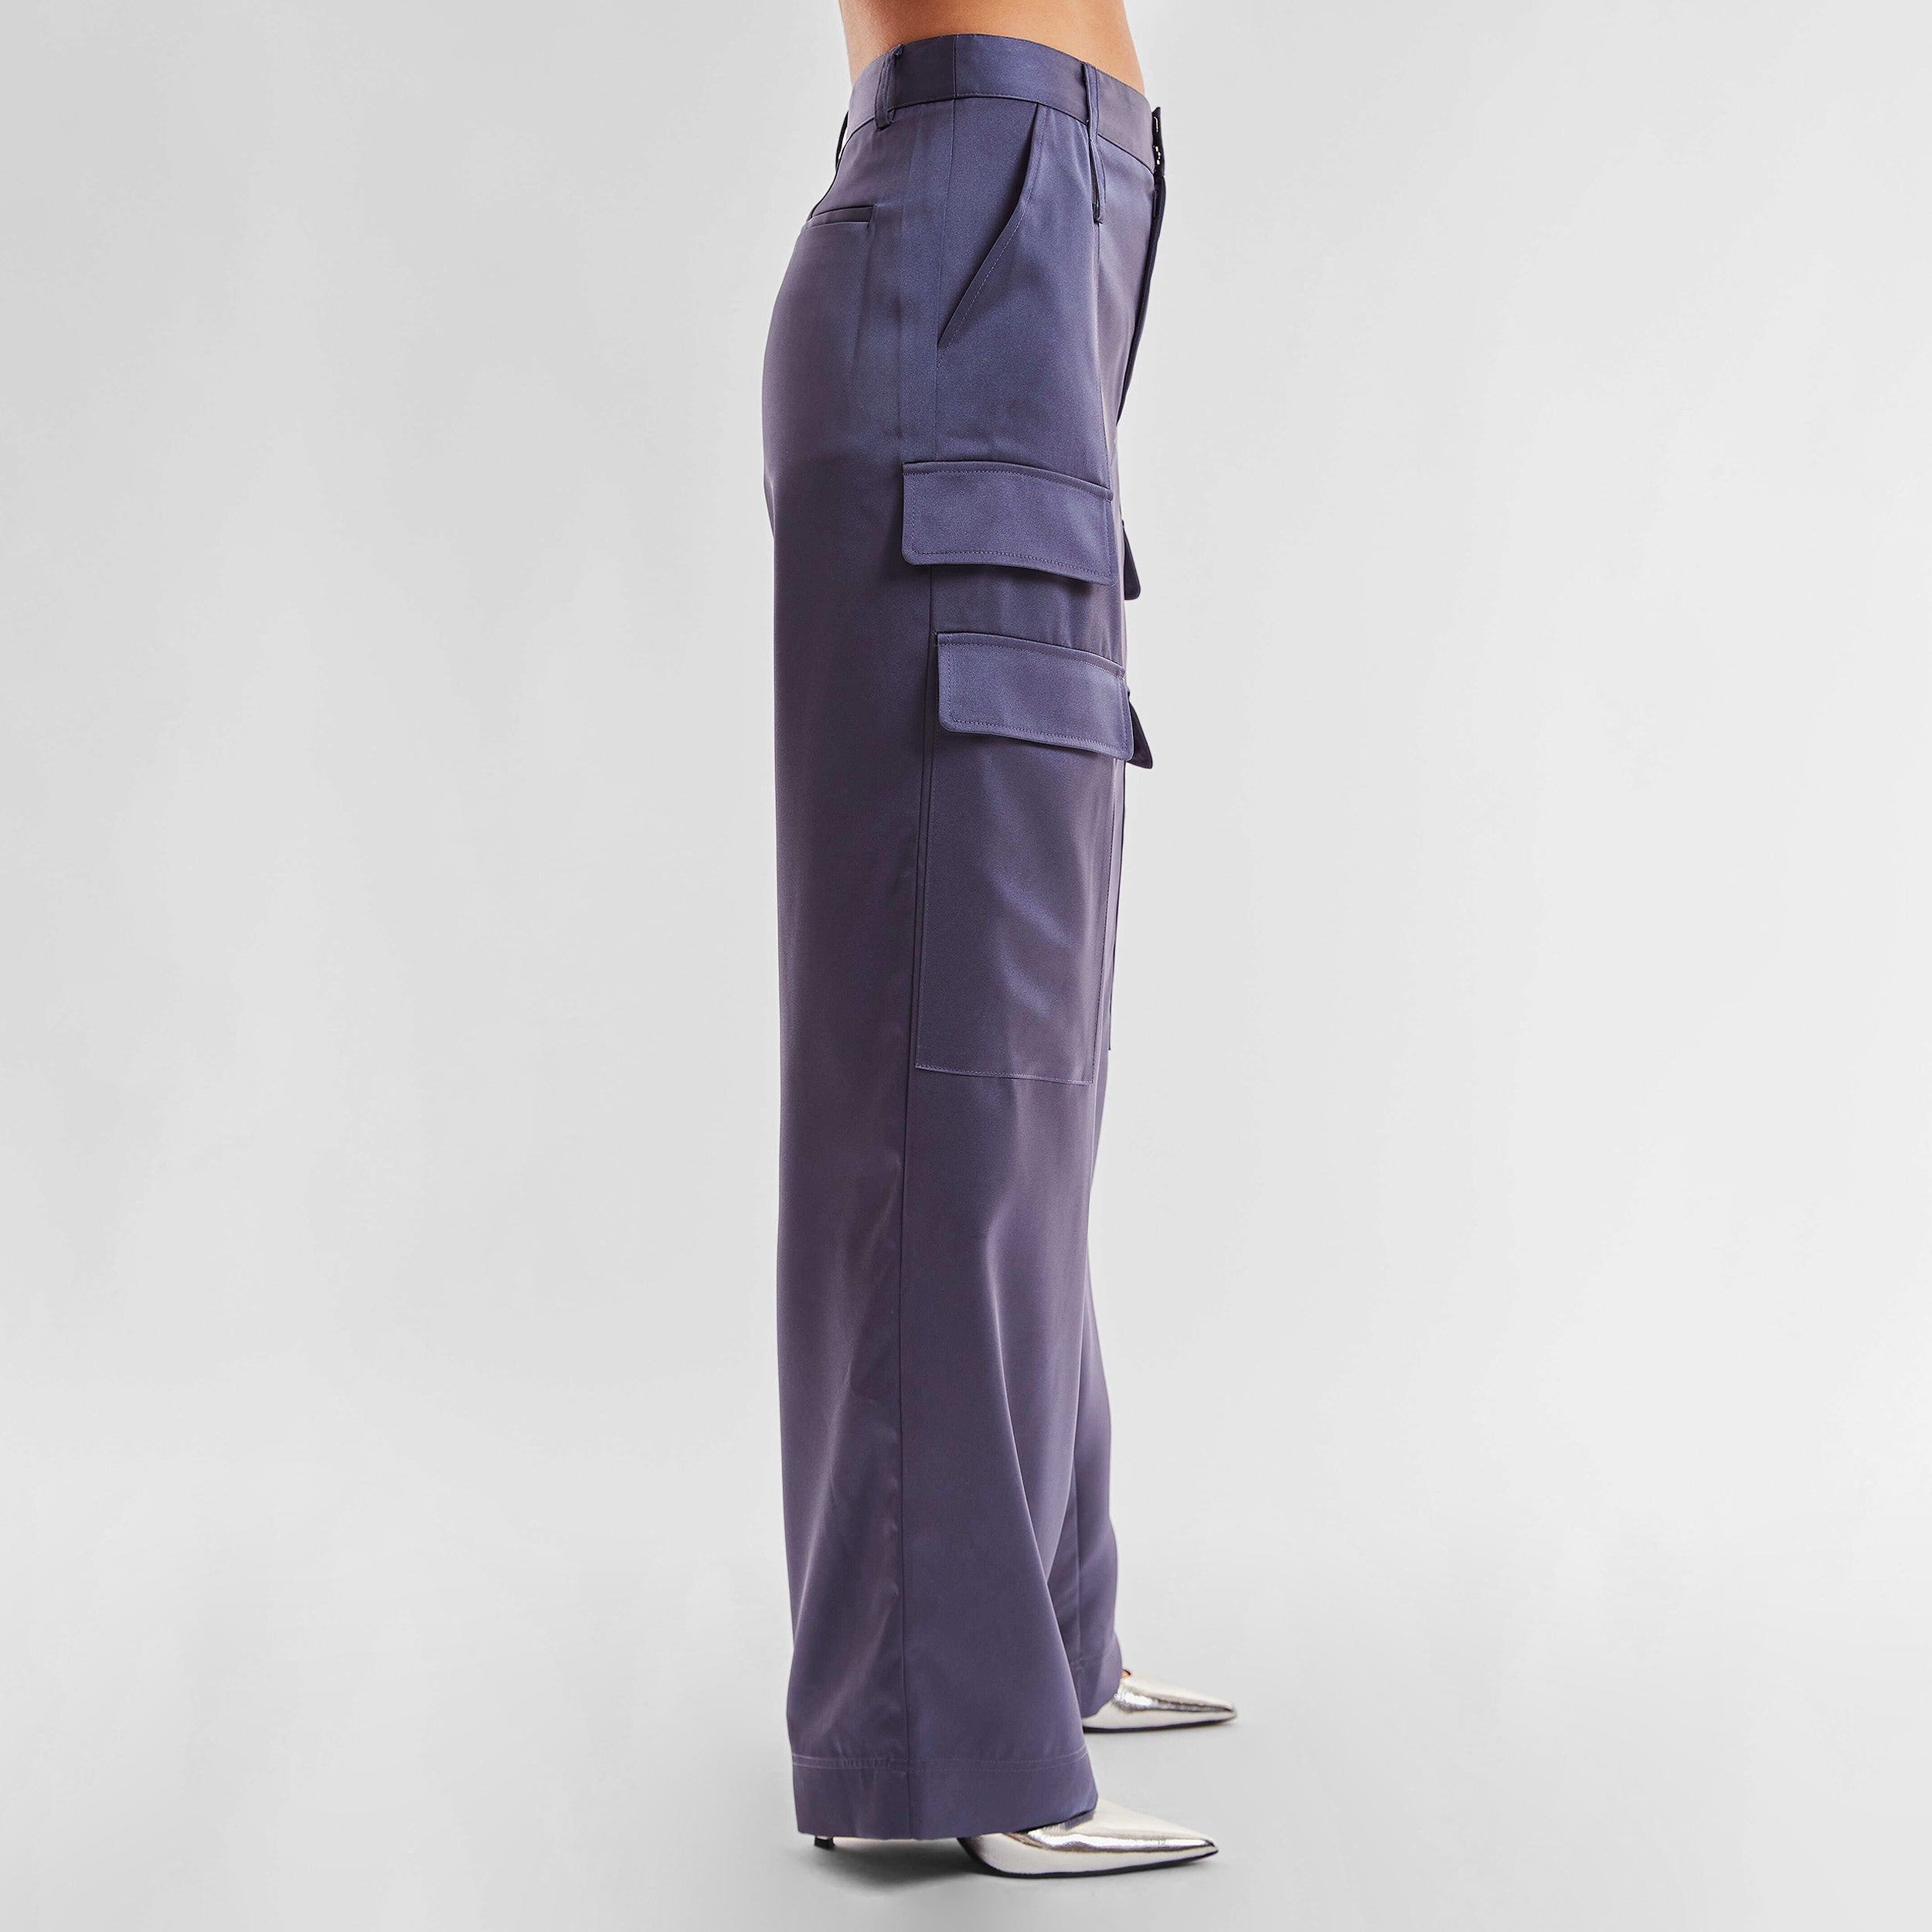 Side view of woman wearing Navy Satin Milan Pant features Mid-rise with side pockets and cargo detail. Luxurious and structured satin-like fabric. 